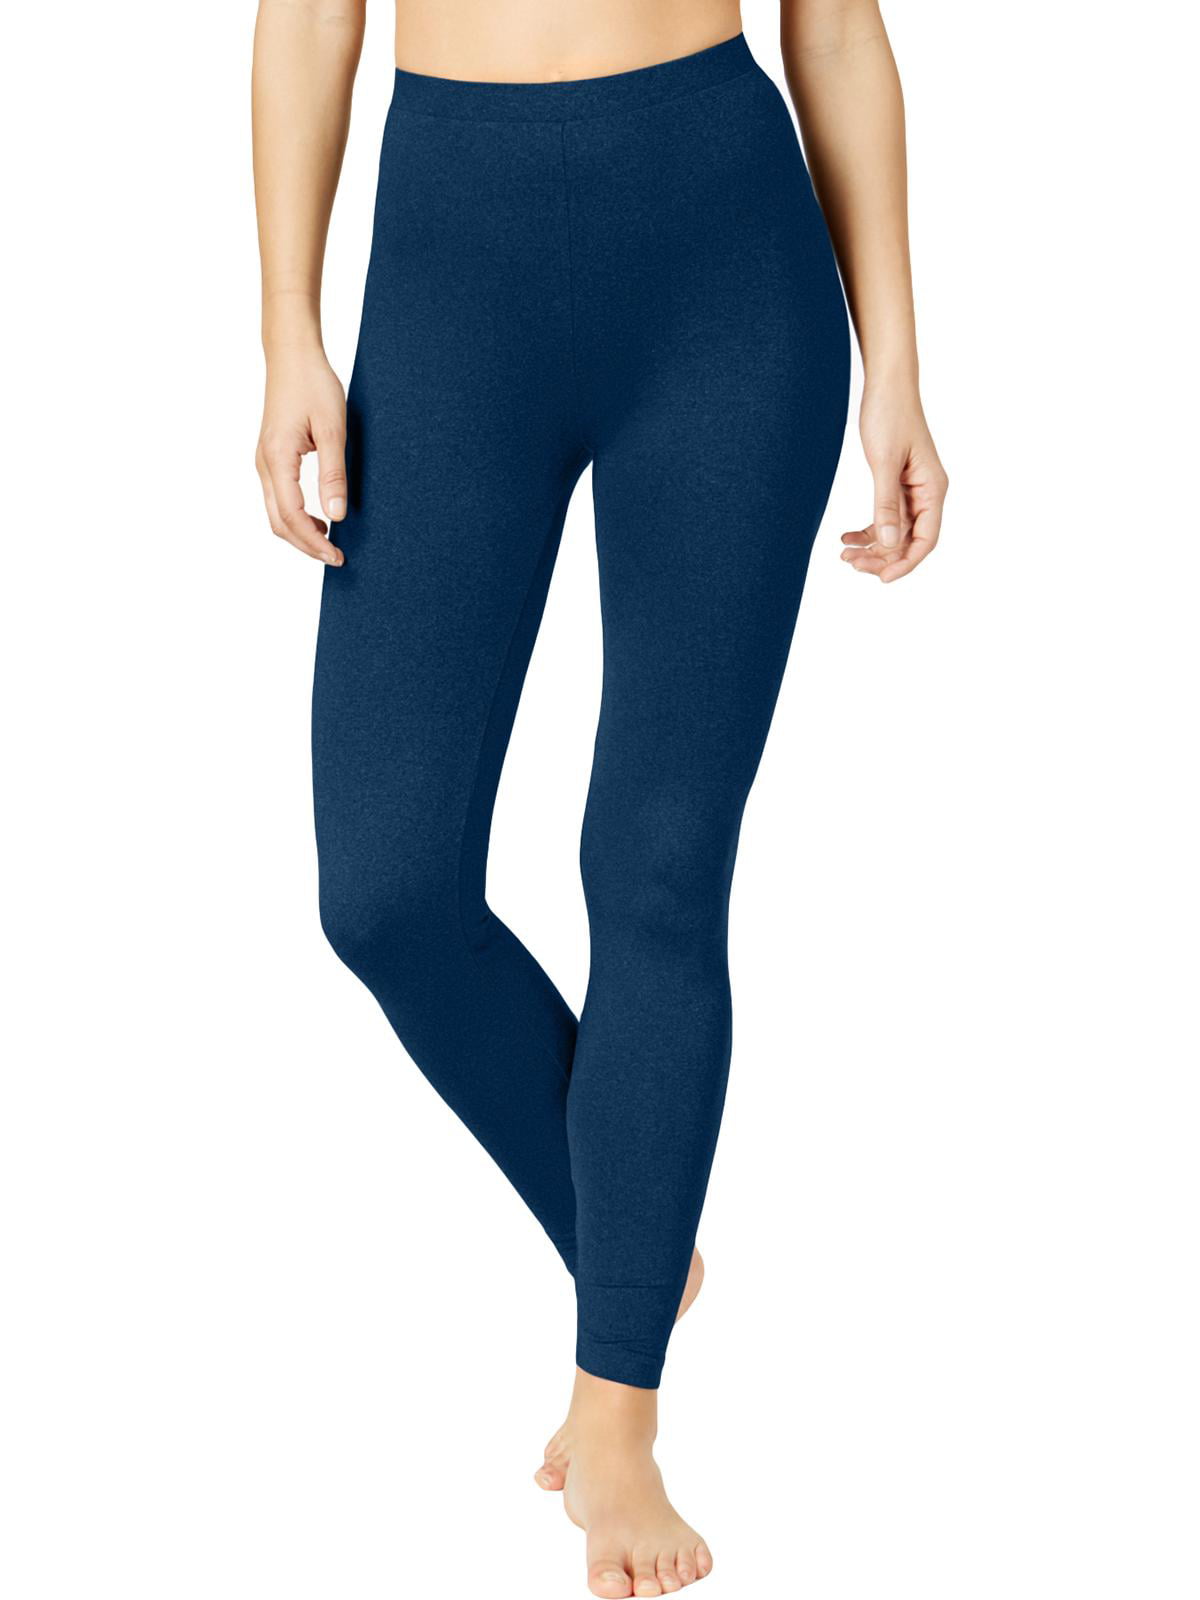 How To Wear Thermal Leggings On Jeans For Women